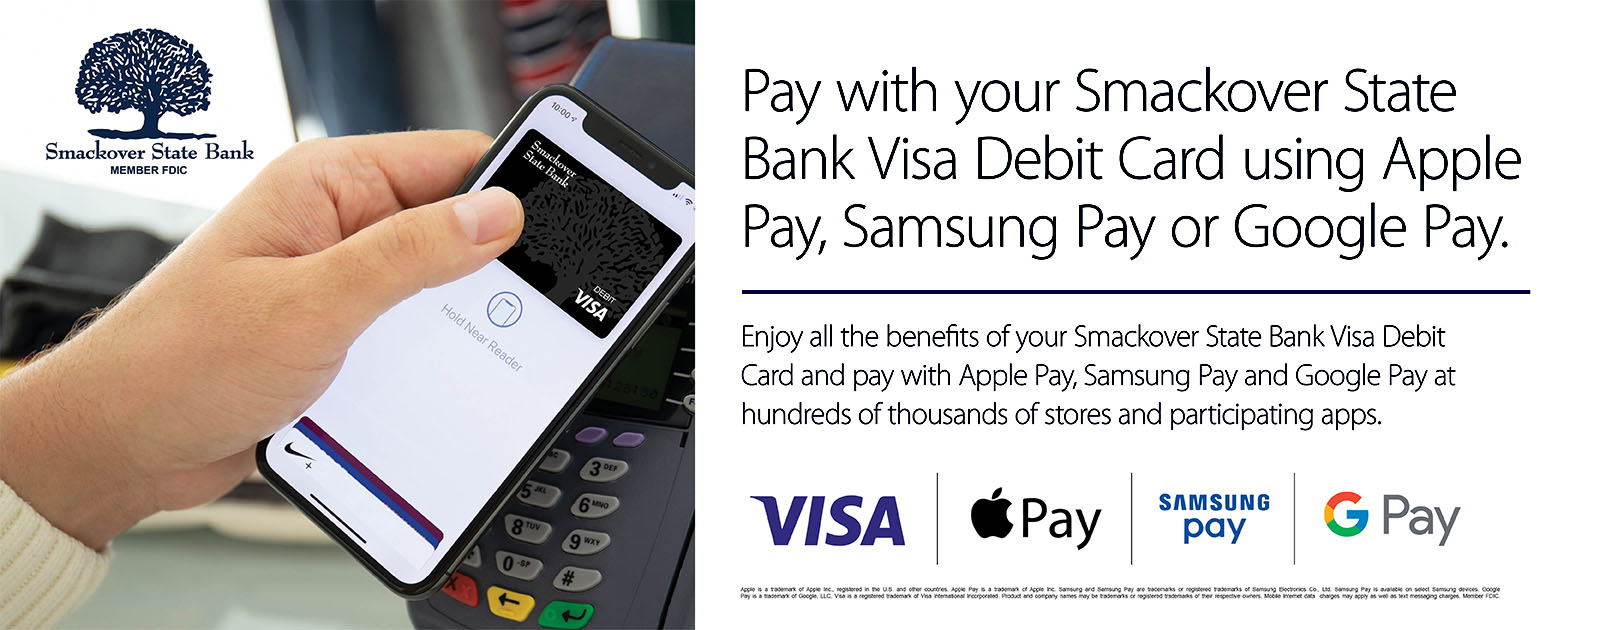 Pay with your Smackover State Bank VISA Card using Apple Pay, Samsung Pay, Google Pay